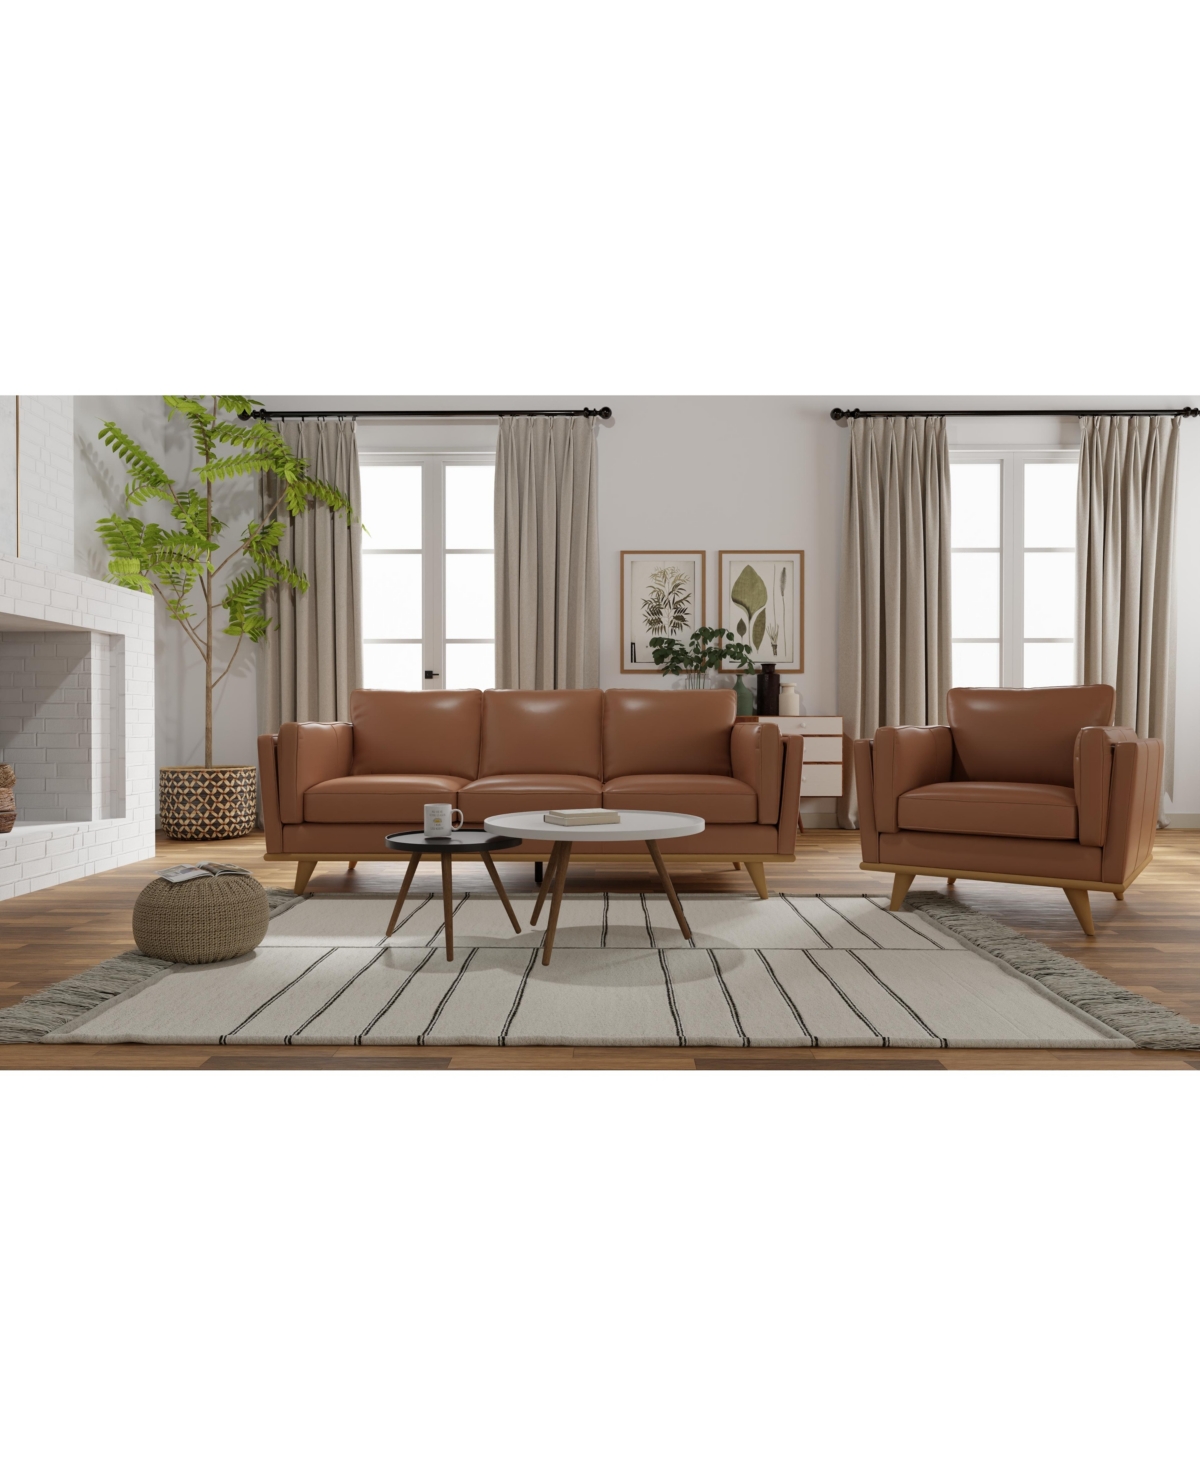 Shop Nice Link Addison 83" Mid-century Modern Leather Sofa In Camel Brown